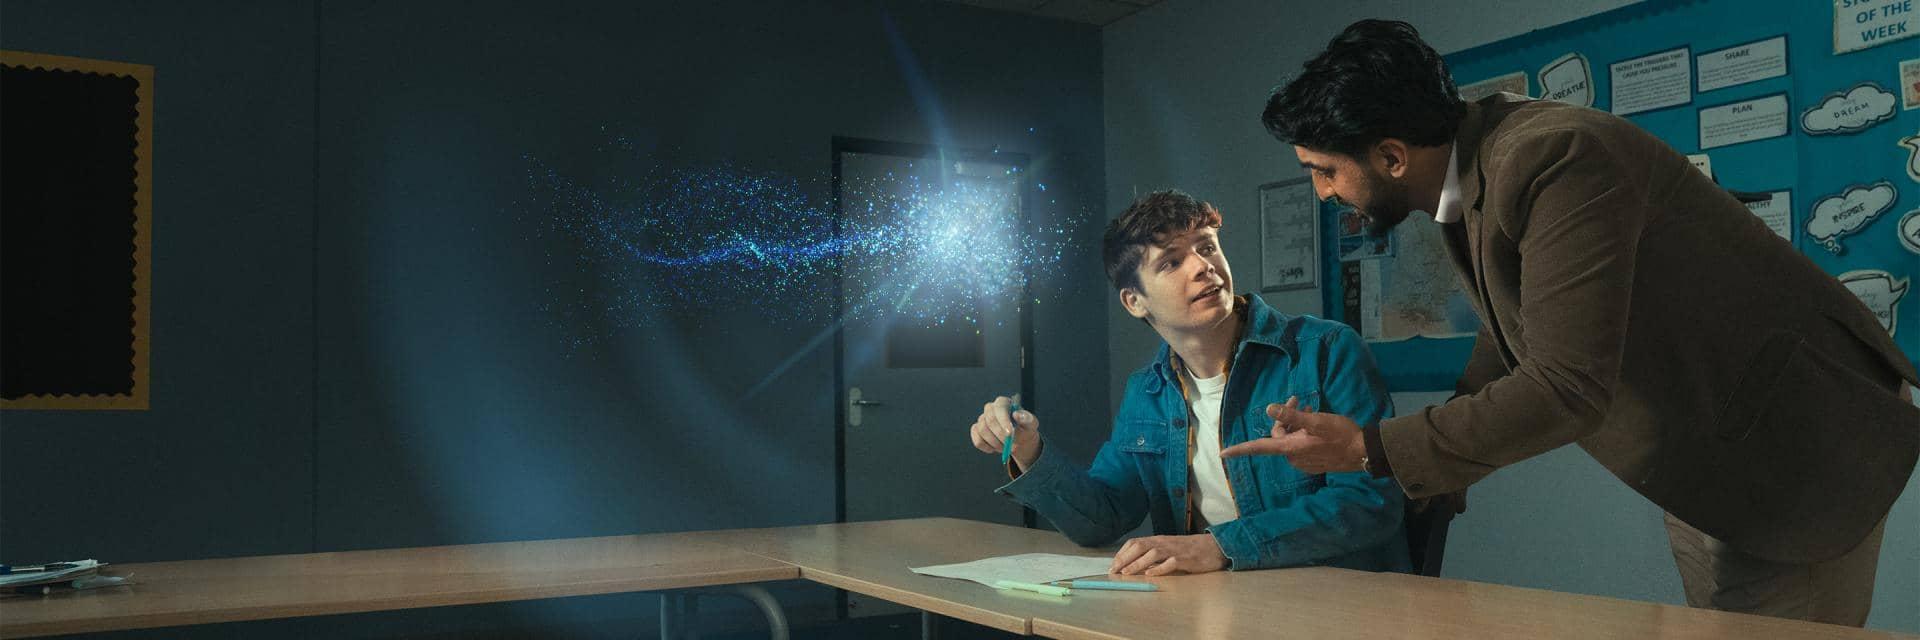 Student being helped by an older man within a classroom, illustrated by a glowing  'spark' 